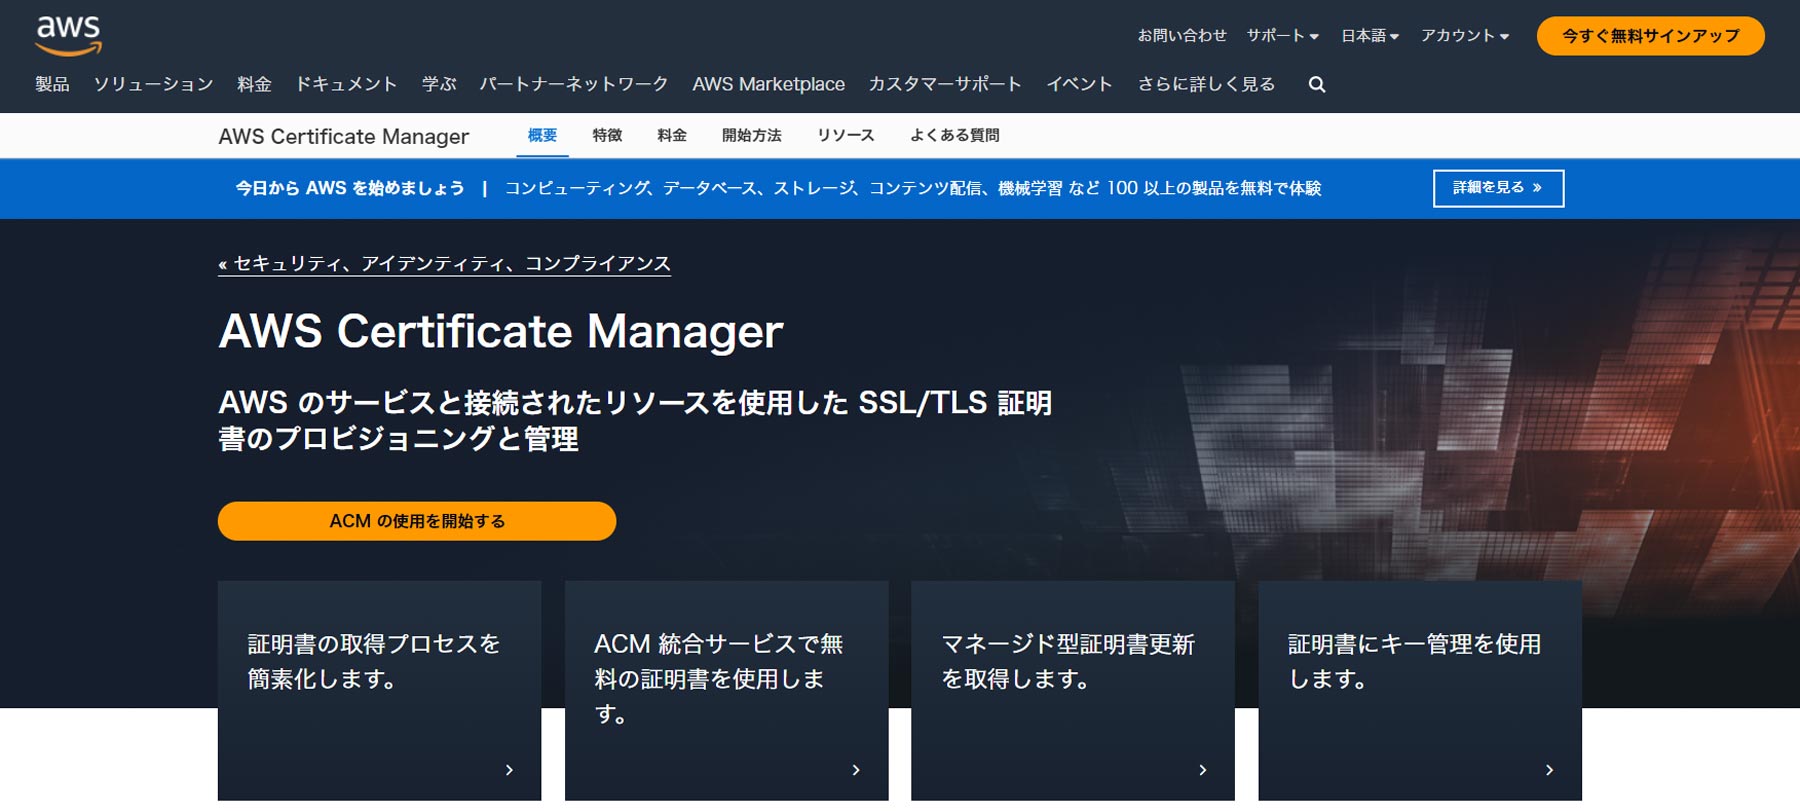 AWS Certificate Manager公式Webサイト